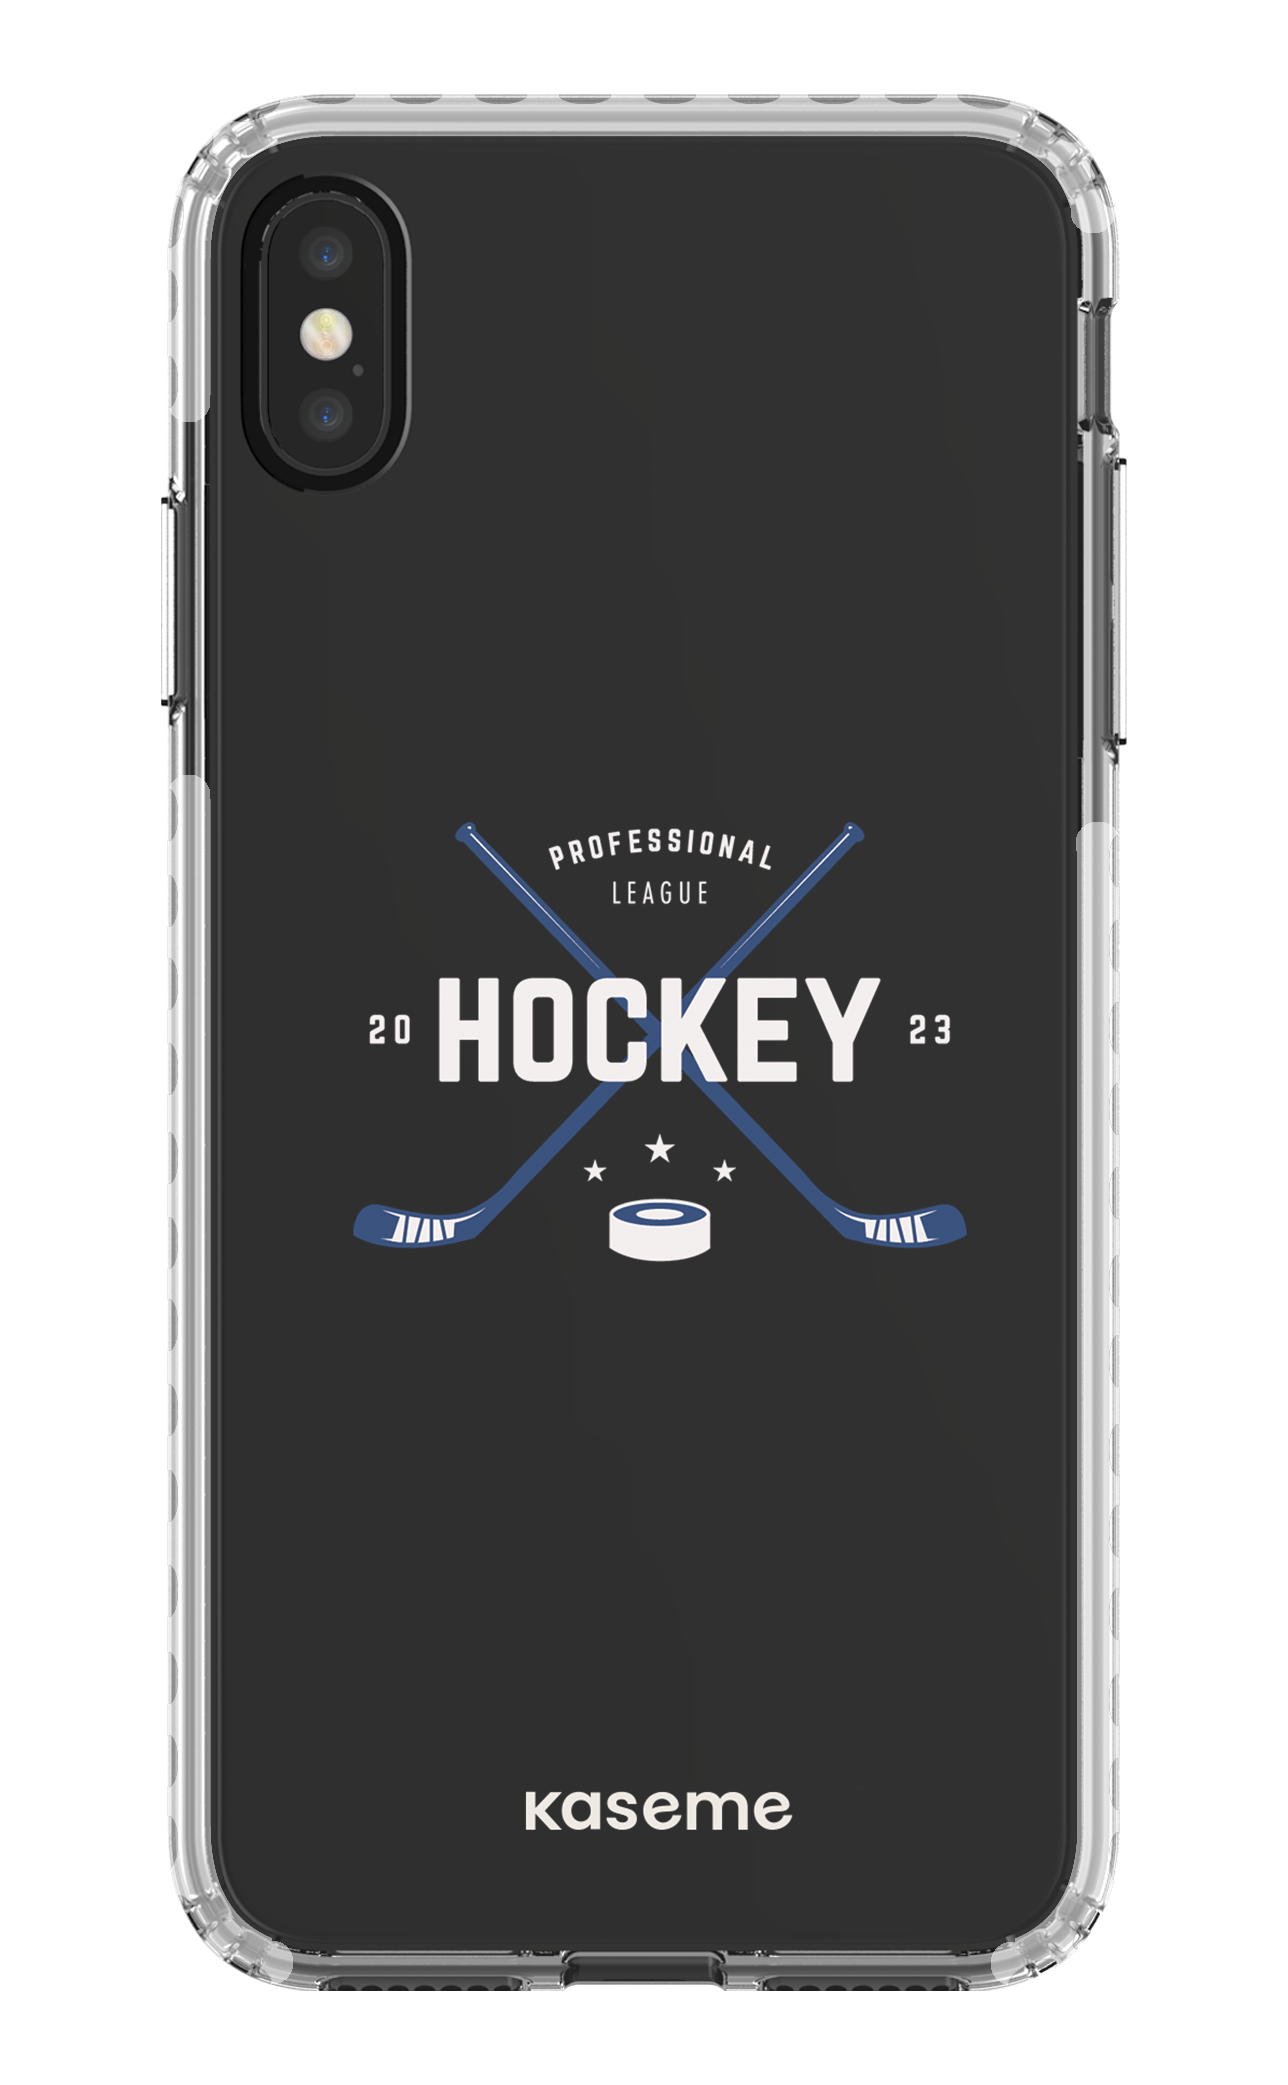 Playoffs clear case - iPhone XS Max